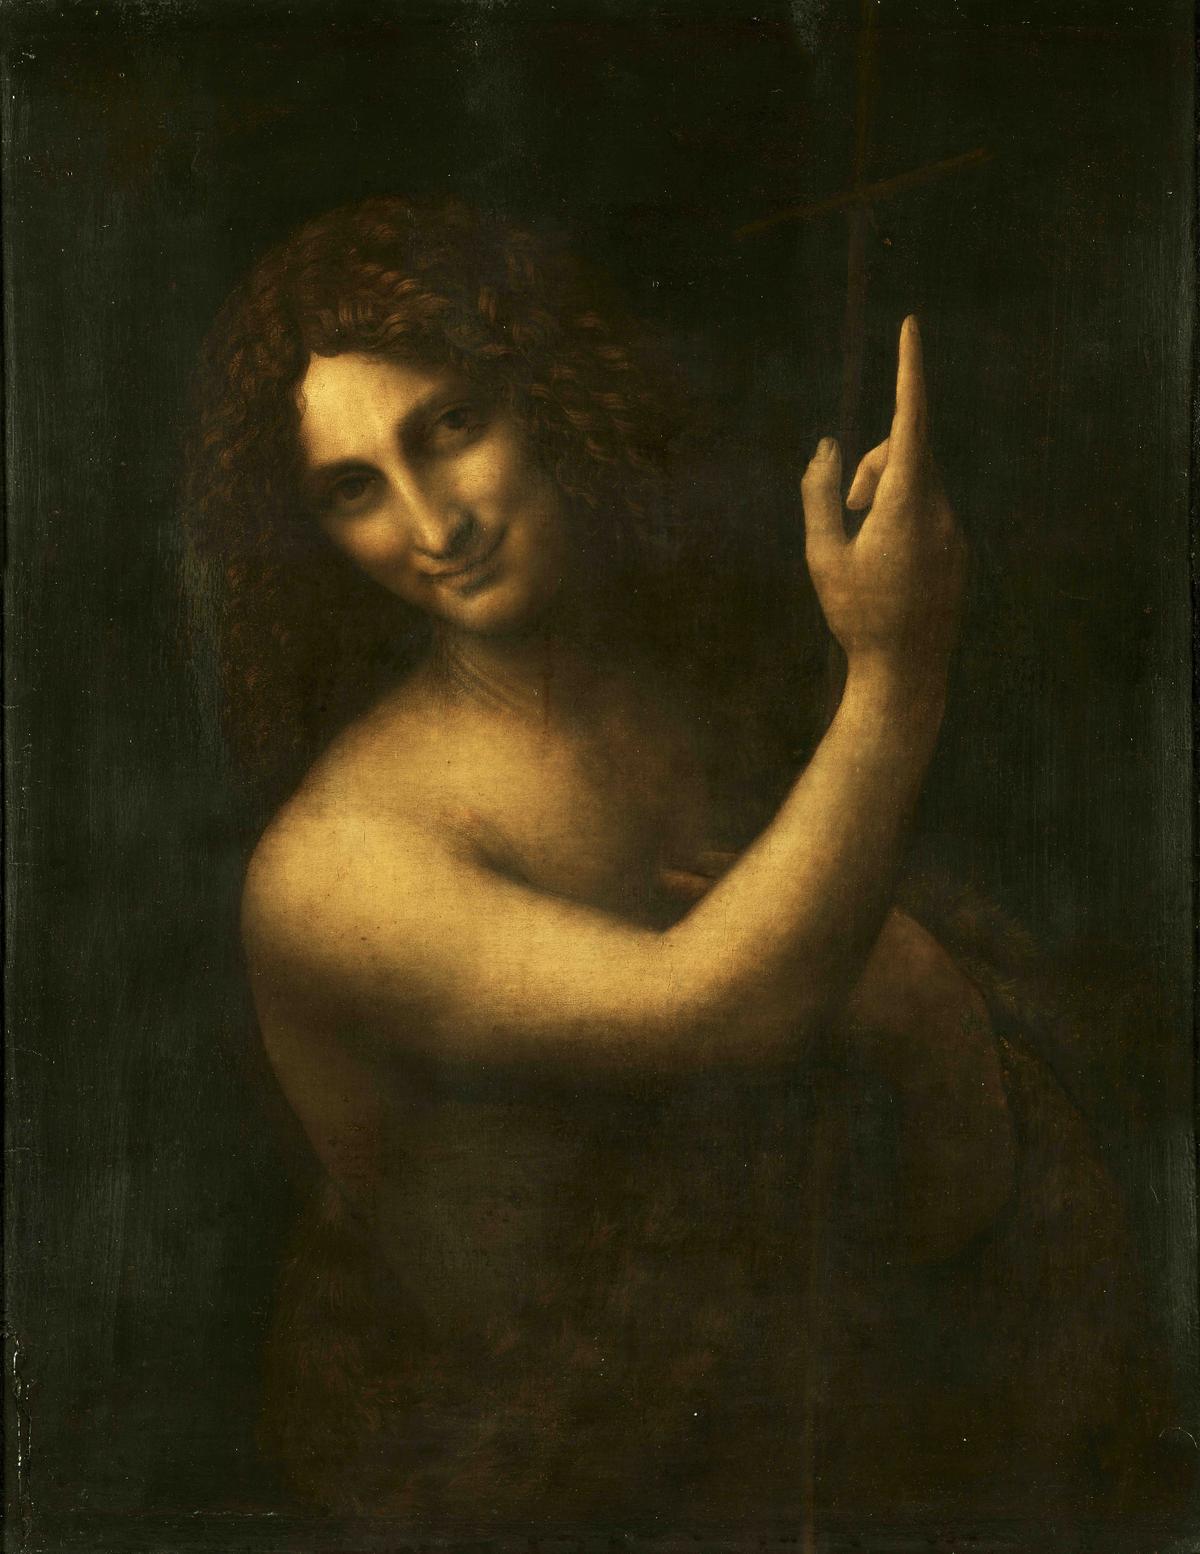 “Saint John the Baptist” from 1513 until 1516 by Leonardo da Vinci. Oil on panel, 27.1 inches by 22.4 inches. Louvre. (Public Domain)